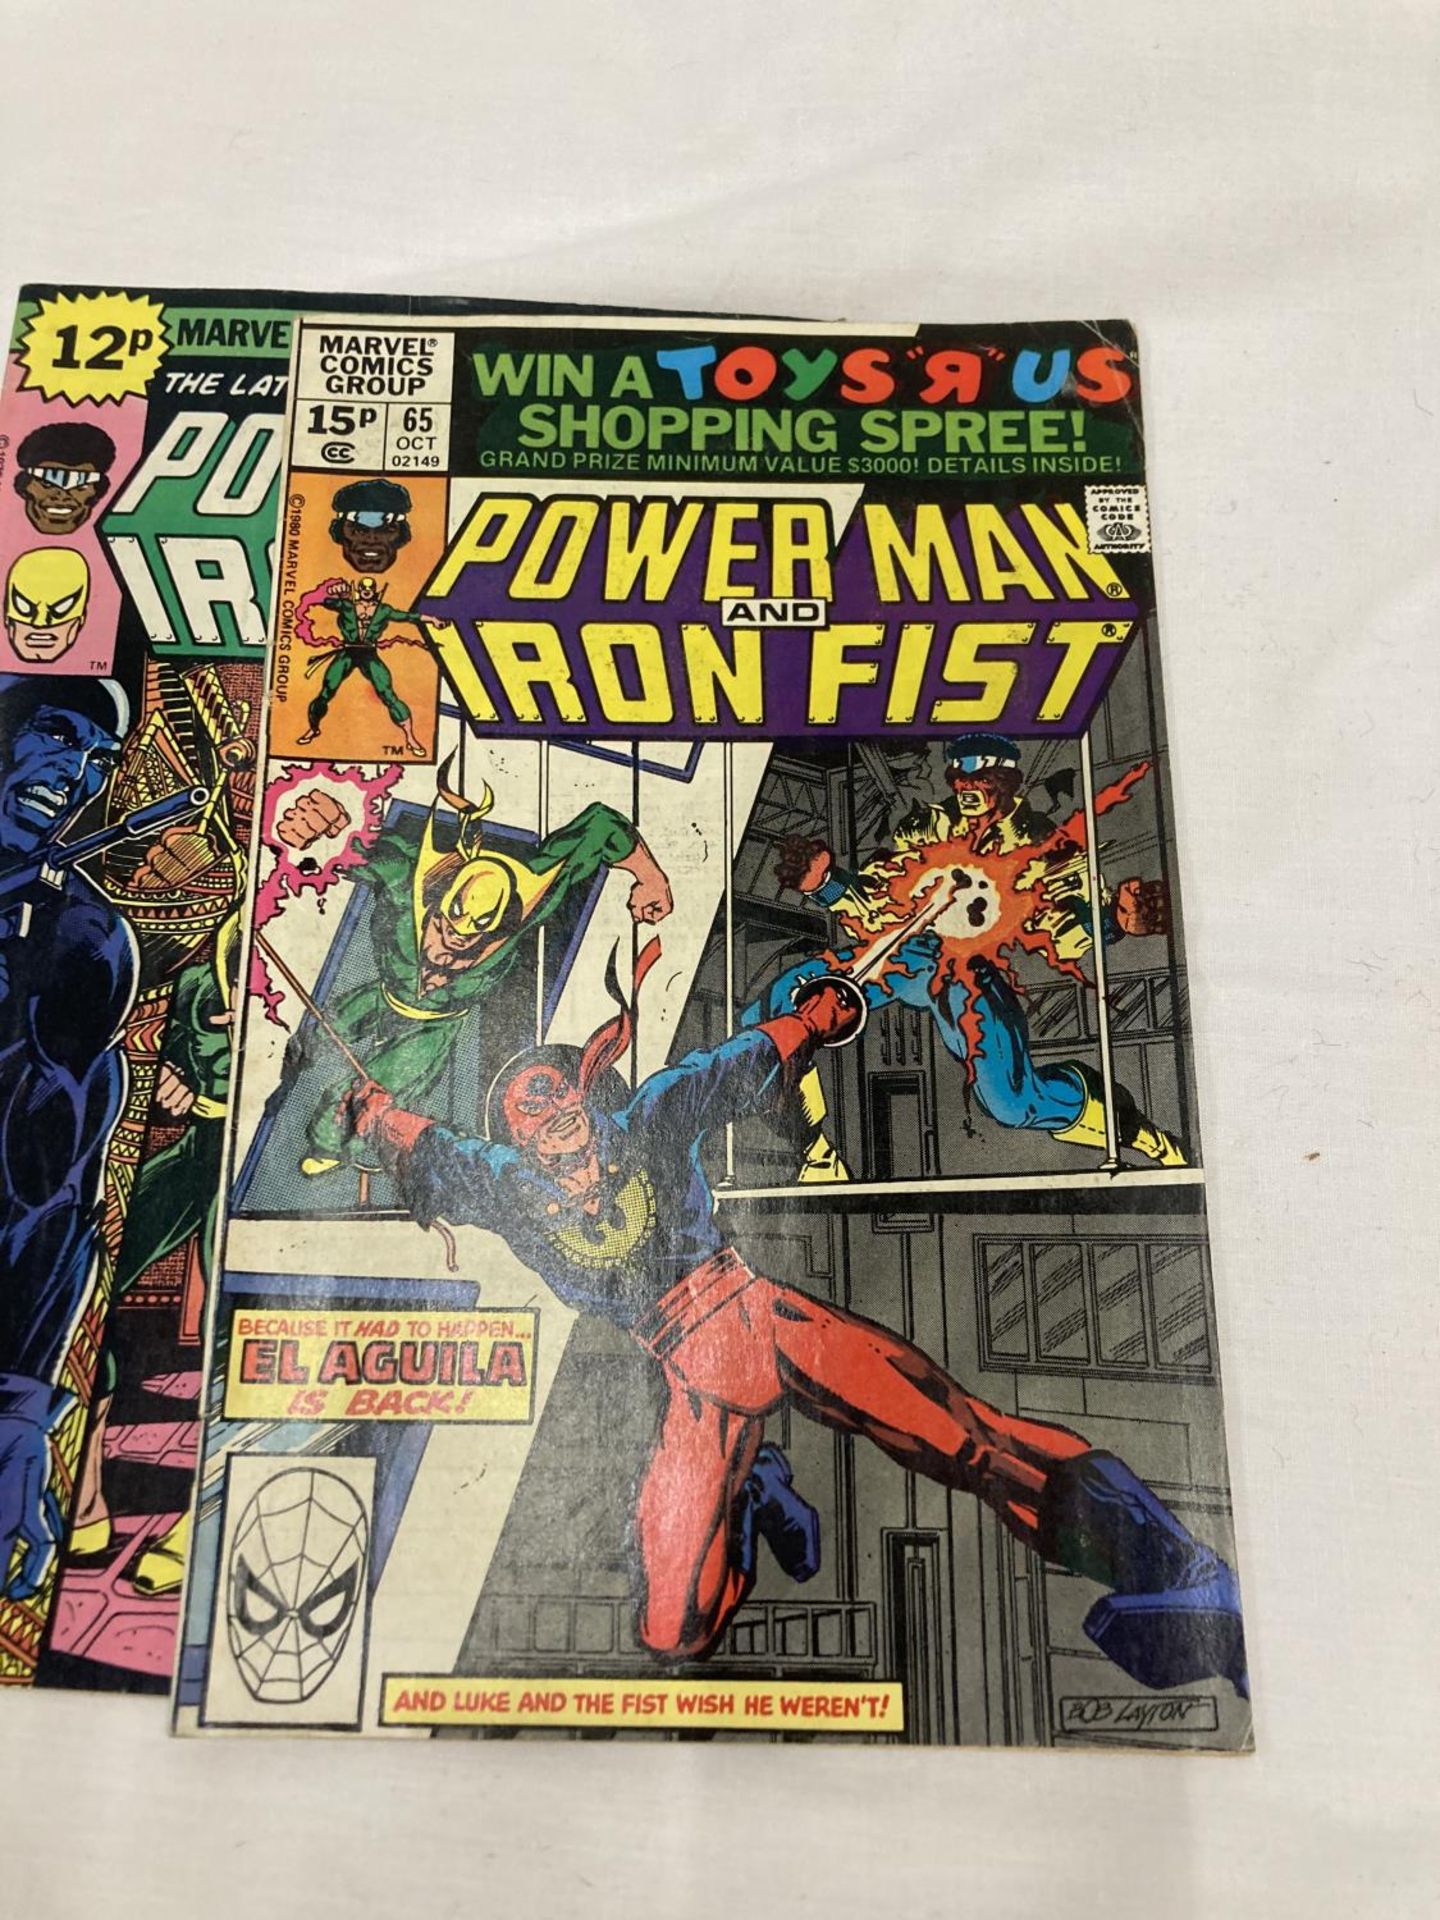 FIVE VINTAGE MARVEL POWERMAN AND IRON FISH COMICS FROM THE 1970'S - Image 10 of 14